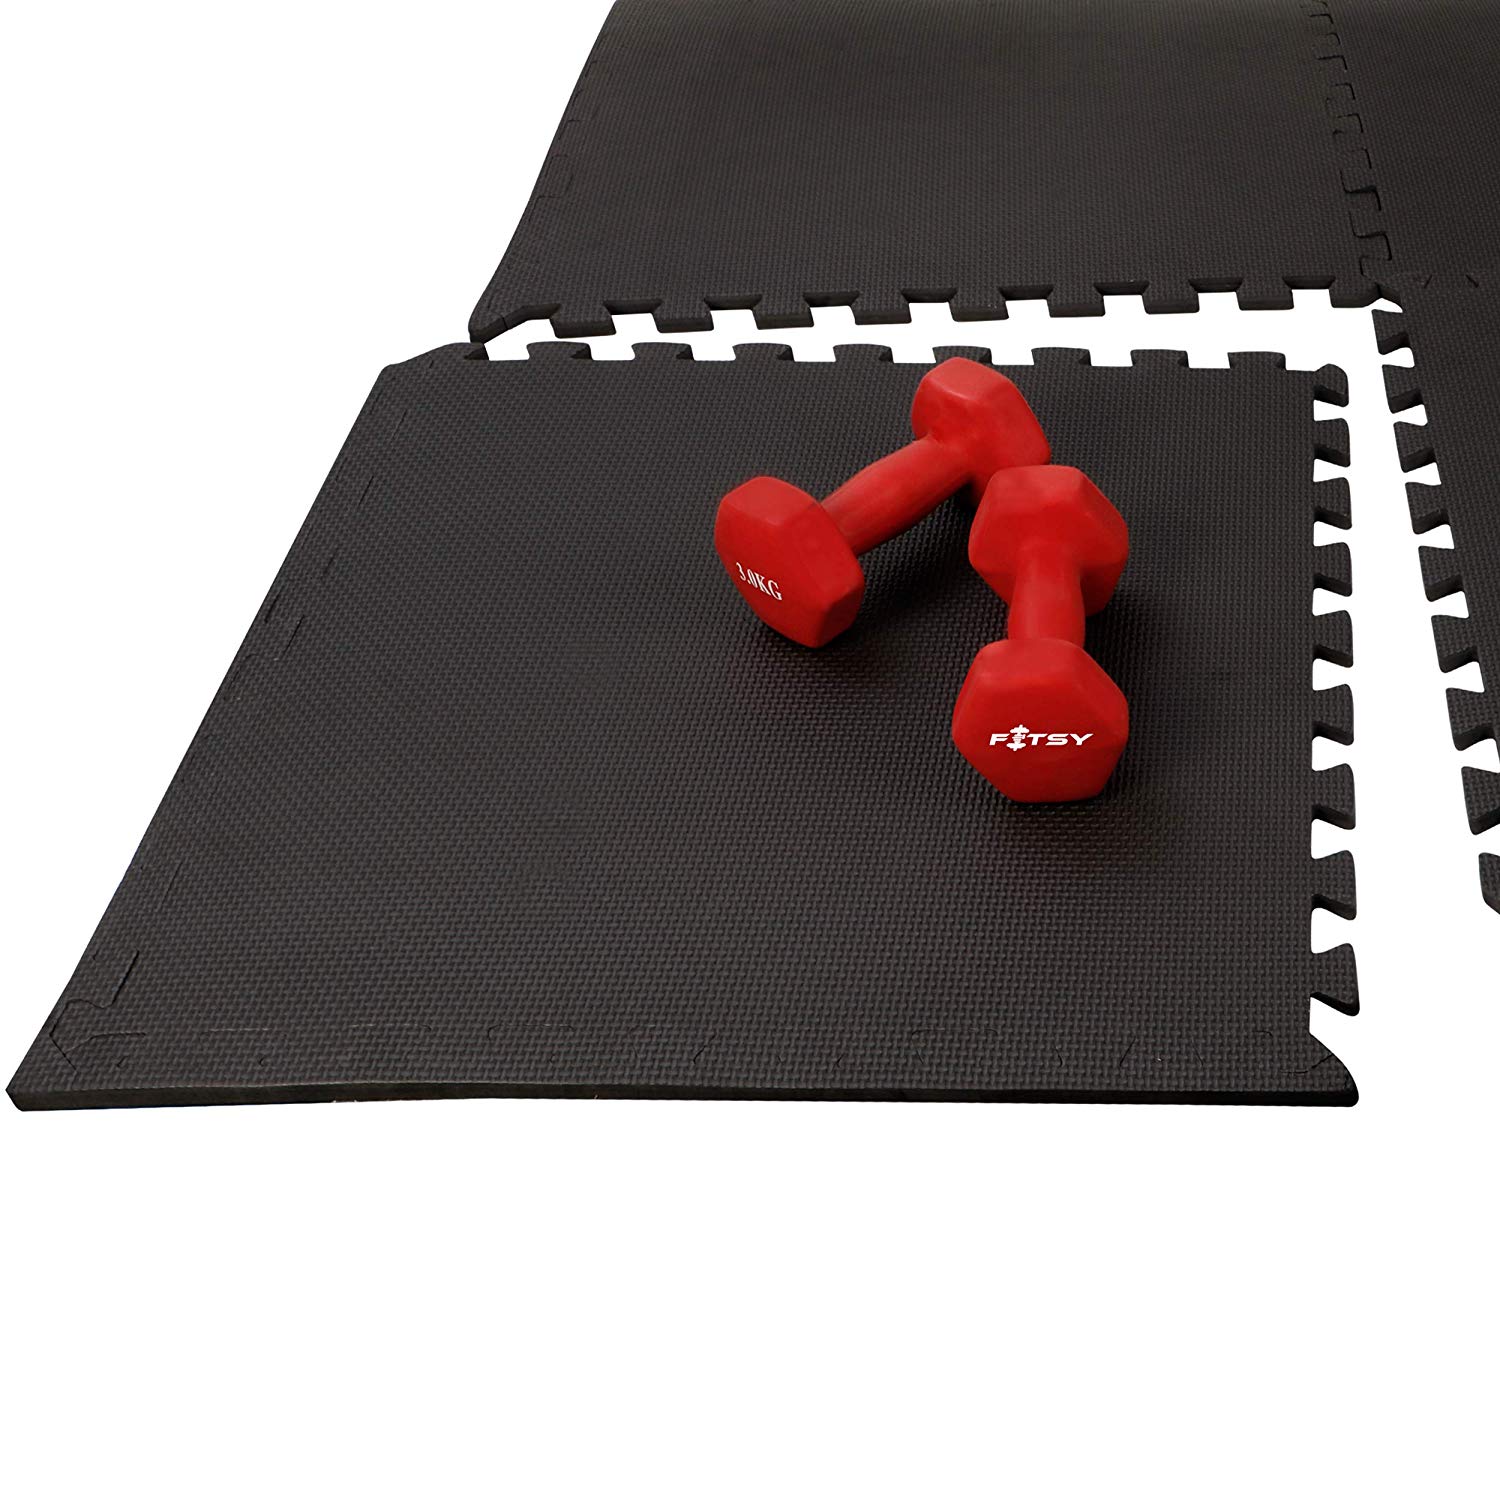 FITSY® Interlocking Puzzle Exercise Mats 12mm Thick - 2 ft. x 2 ft. per ...